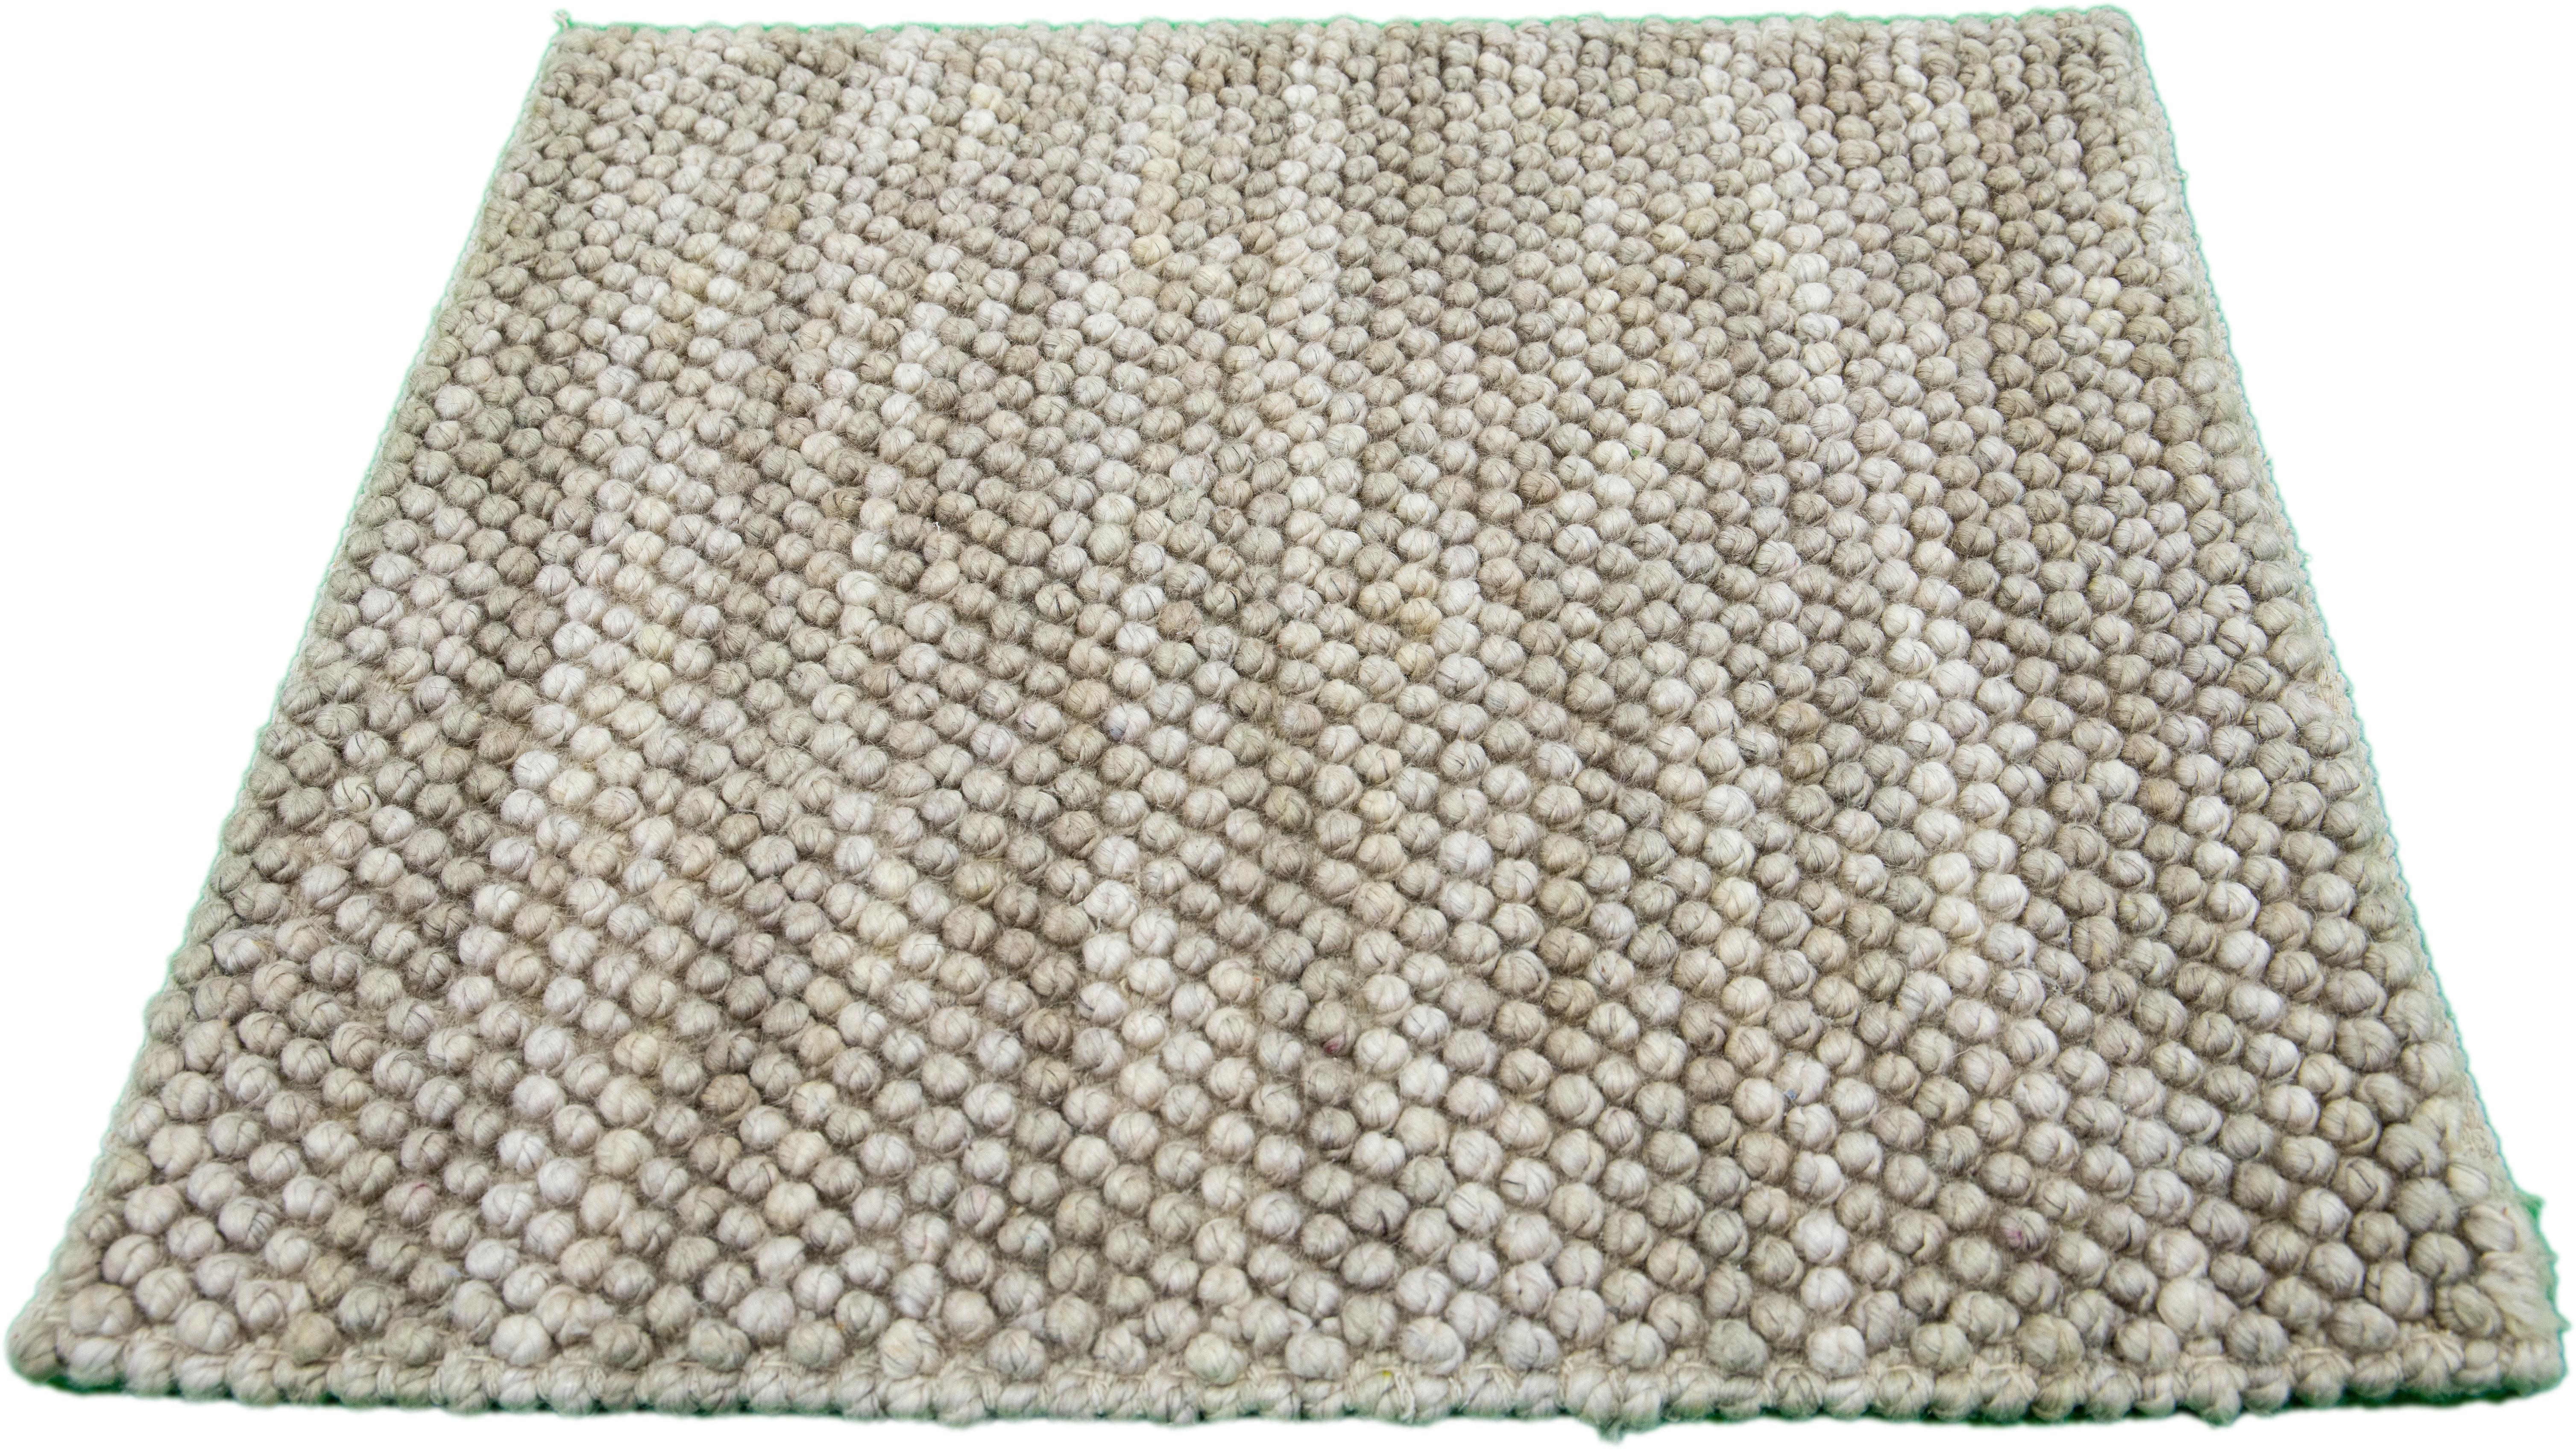 Apadana's Modern Texture wool custom rug. Custom sizes and colors made-to-order. 

Material: Wool 
Techniques: Hand-Knotted
Style: Modern Texture
Lead time: Approx. 15-16 wks available 
Colors: As shown, other custom colors are available.